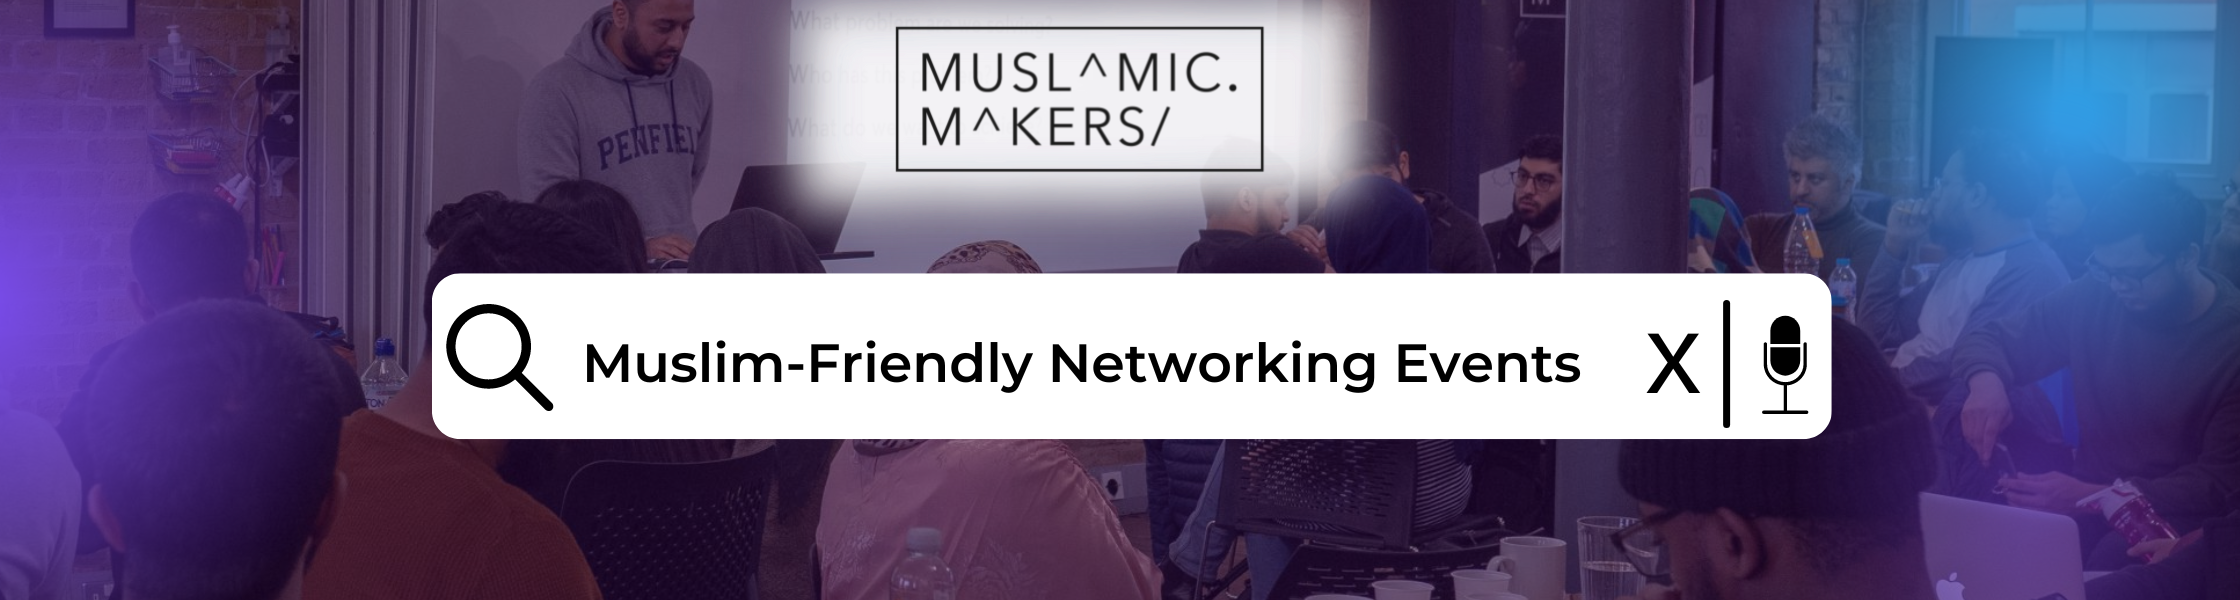 "I'd Leave Early or I Wouldn't Go": Arfah Farooq on the Lack of Muslim-Friendly Network Events.